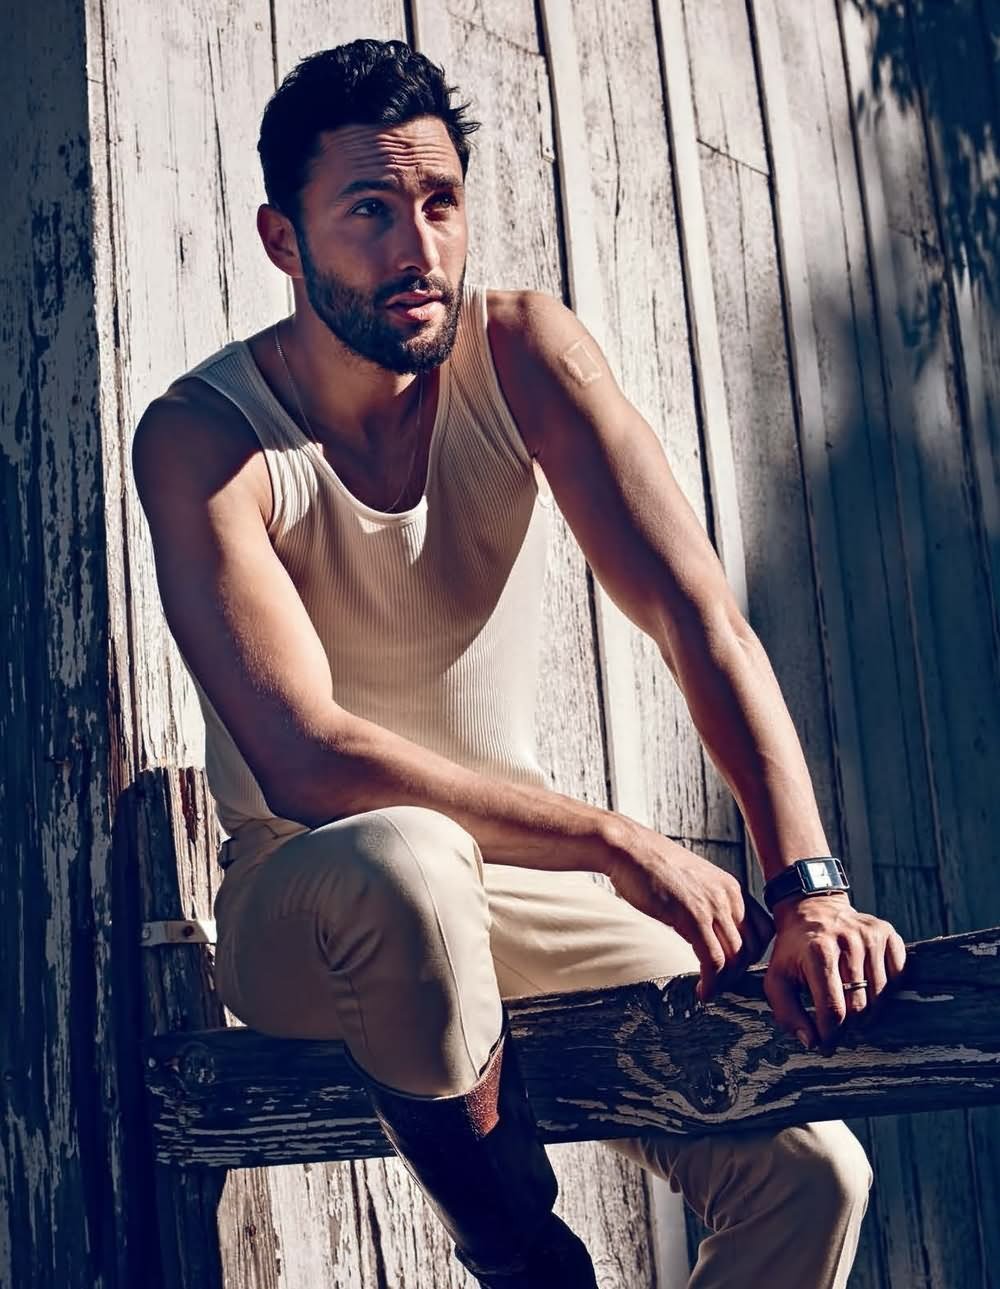 American model Noah Mills wears a pair of leather riding boots with a casual ensemble for The Sunday Telegraph.